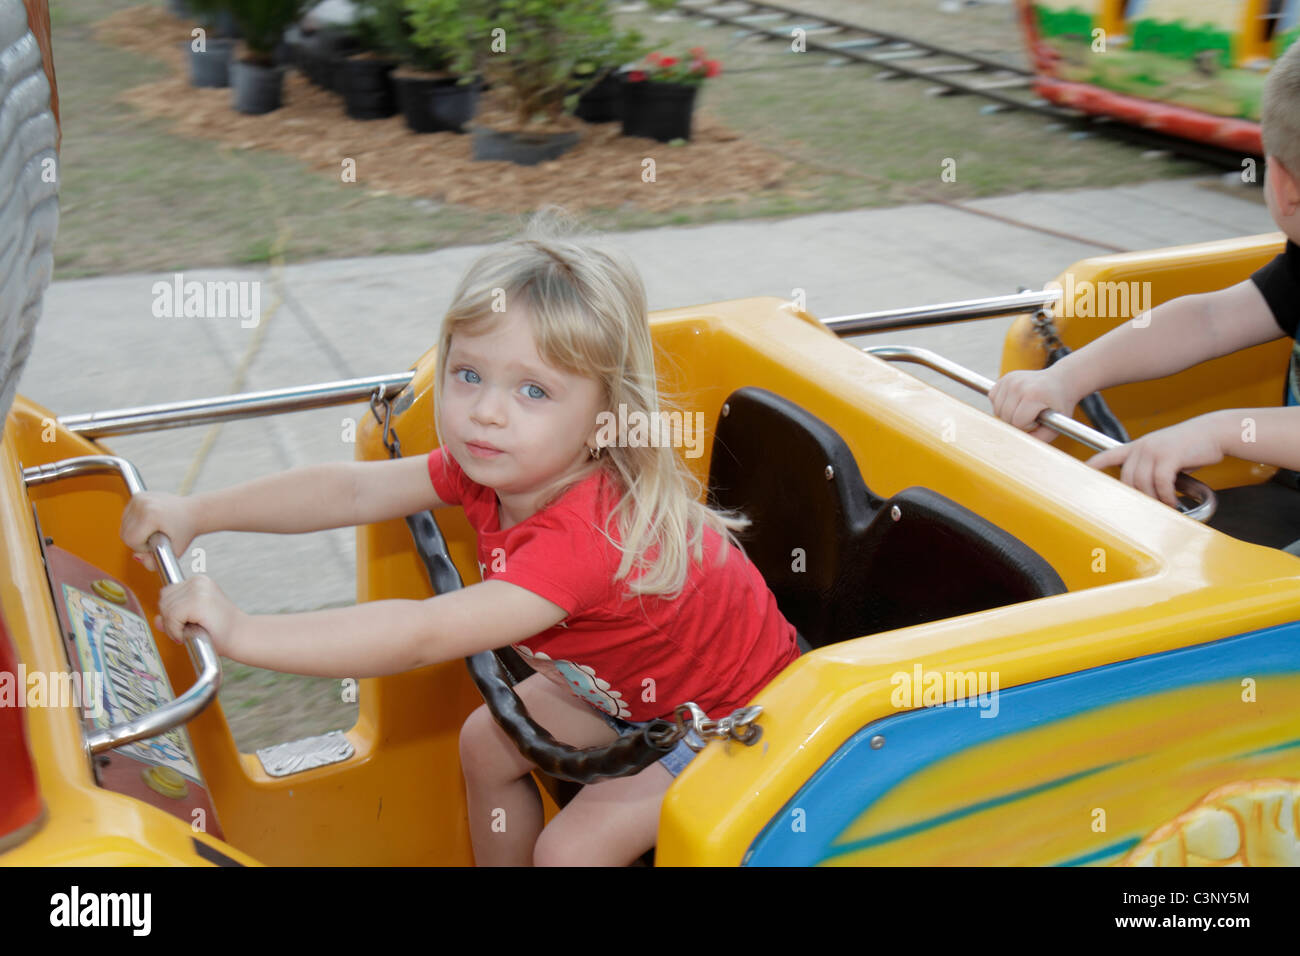 Plant City Florida,Florida Strawberry Festival,event,girl girls,youngster youngsters youth youths female kid kids child children,holding on,kiddy ride Stock Photo